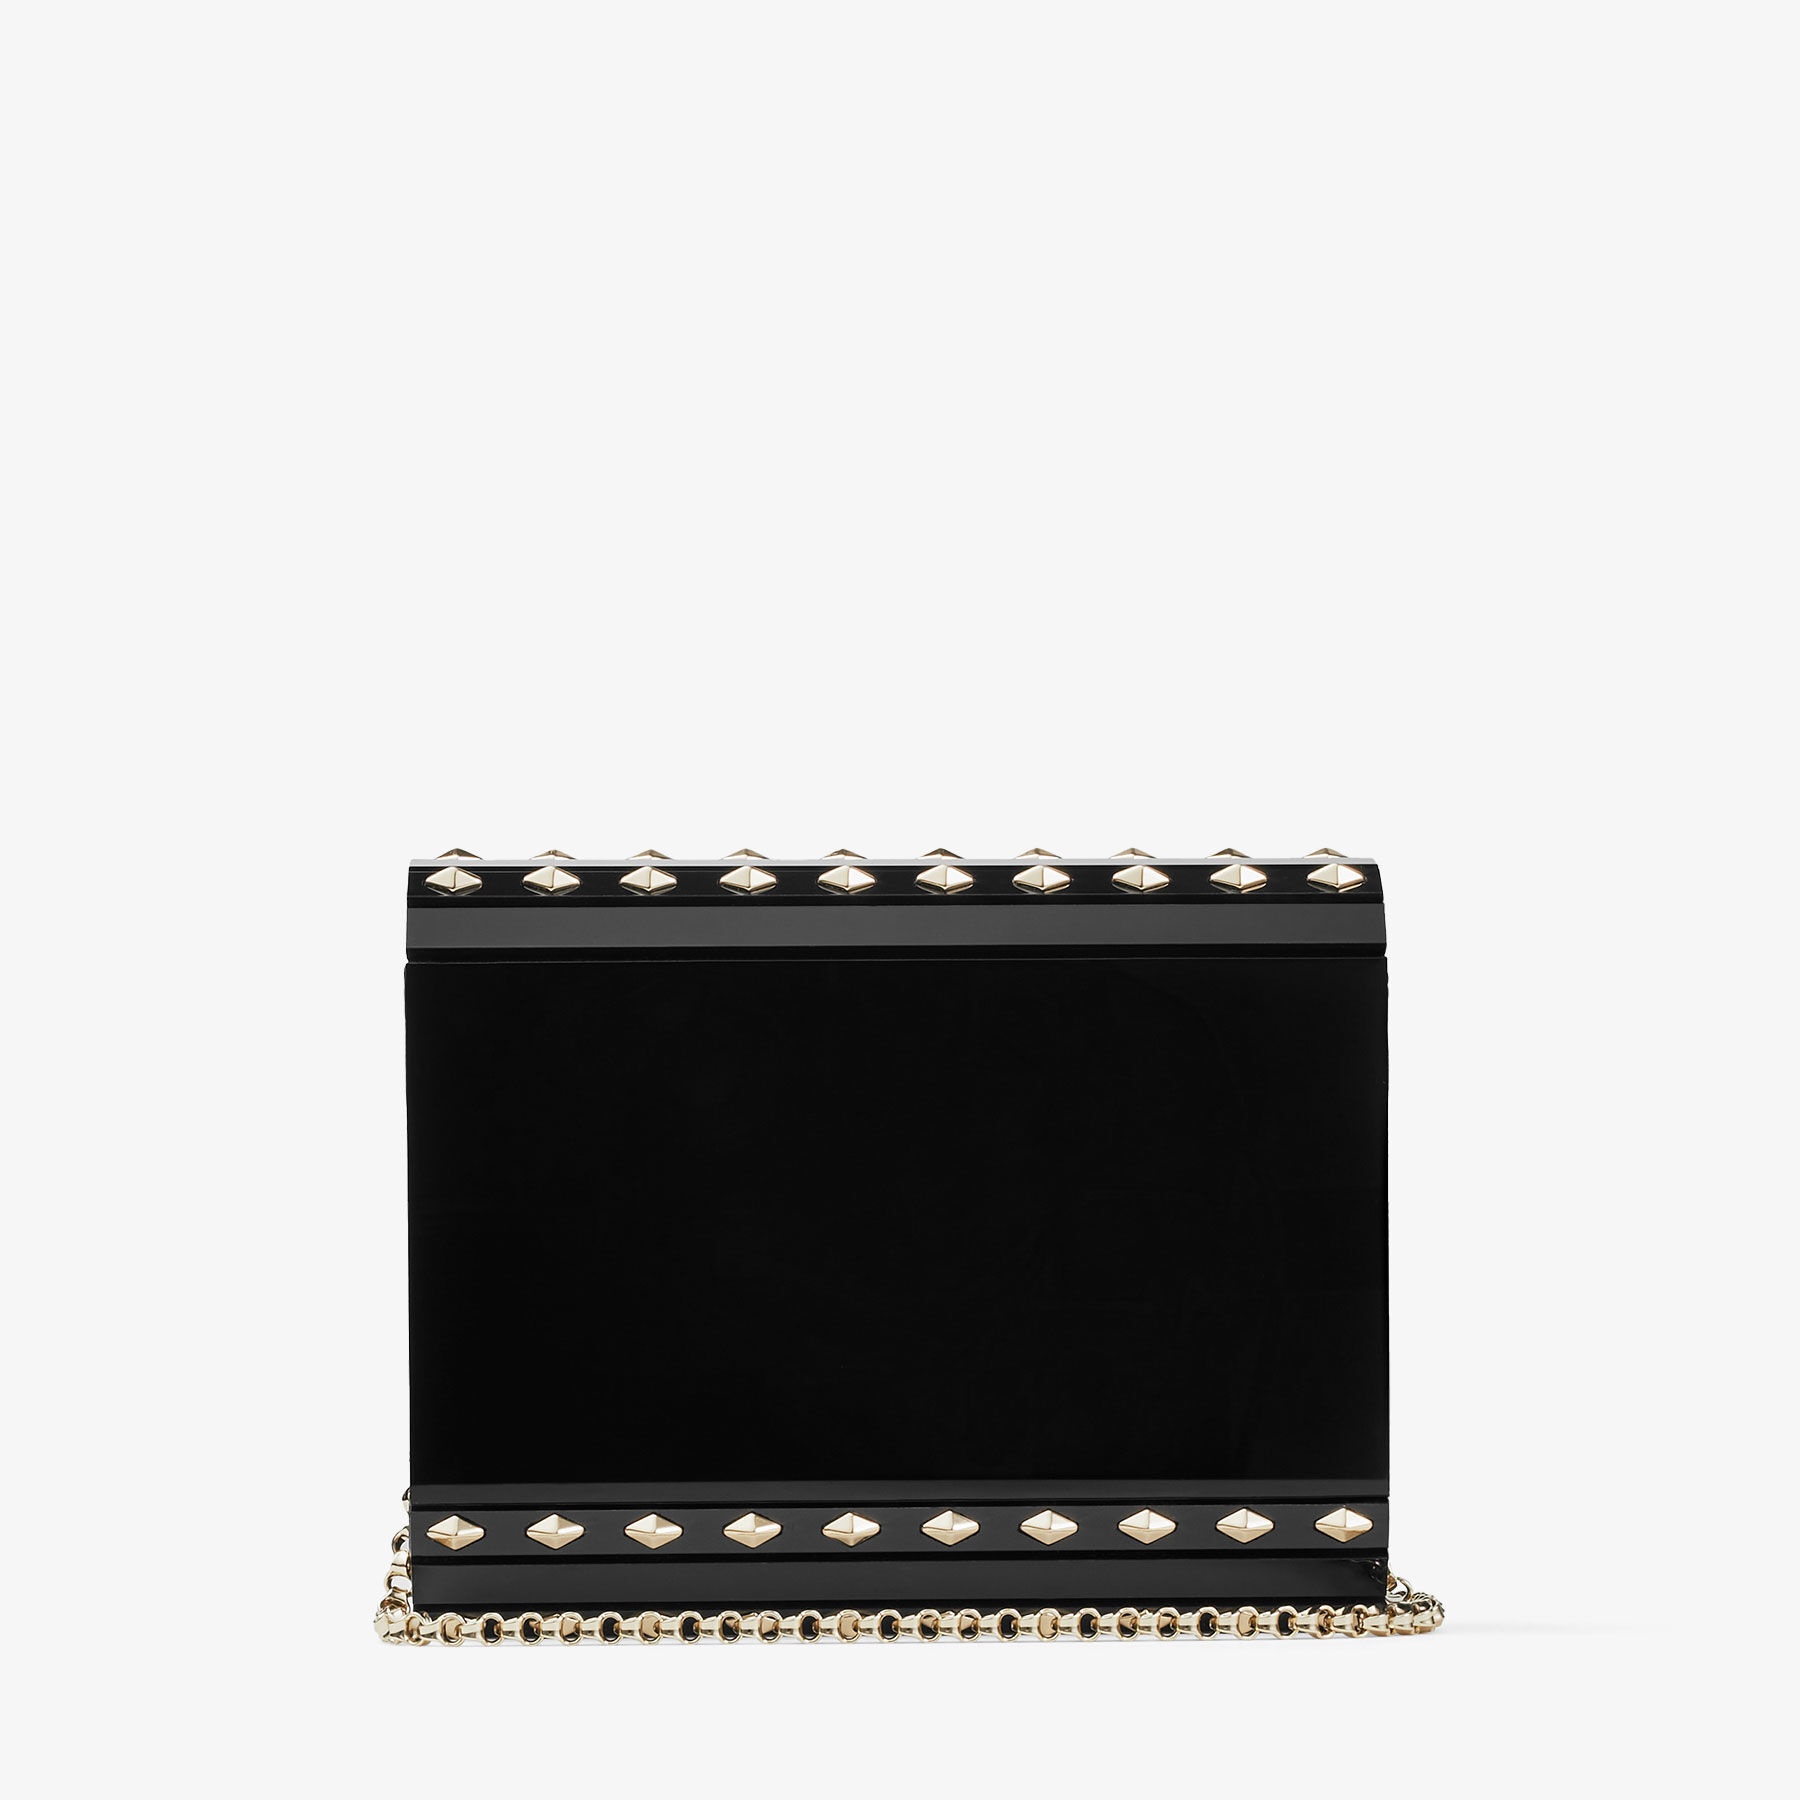 Candy
Black Acrylic Clutch Bag with Studs - 6